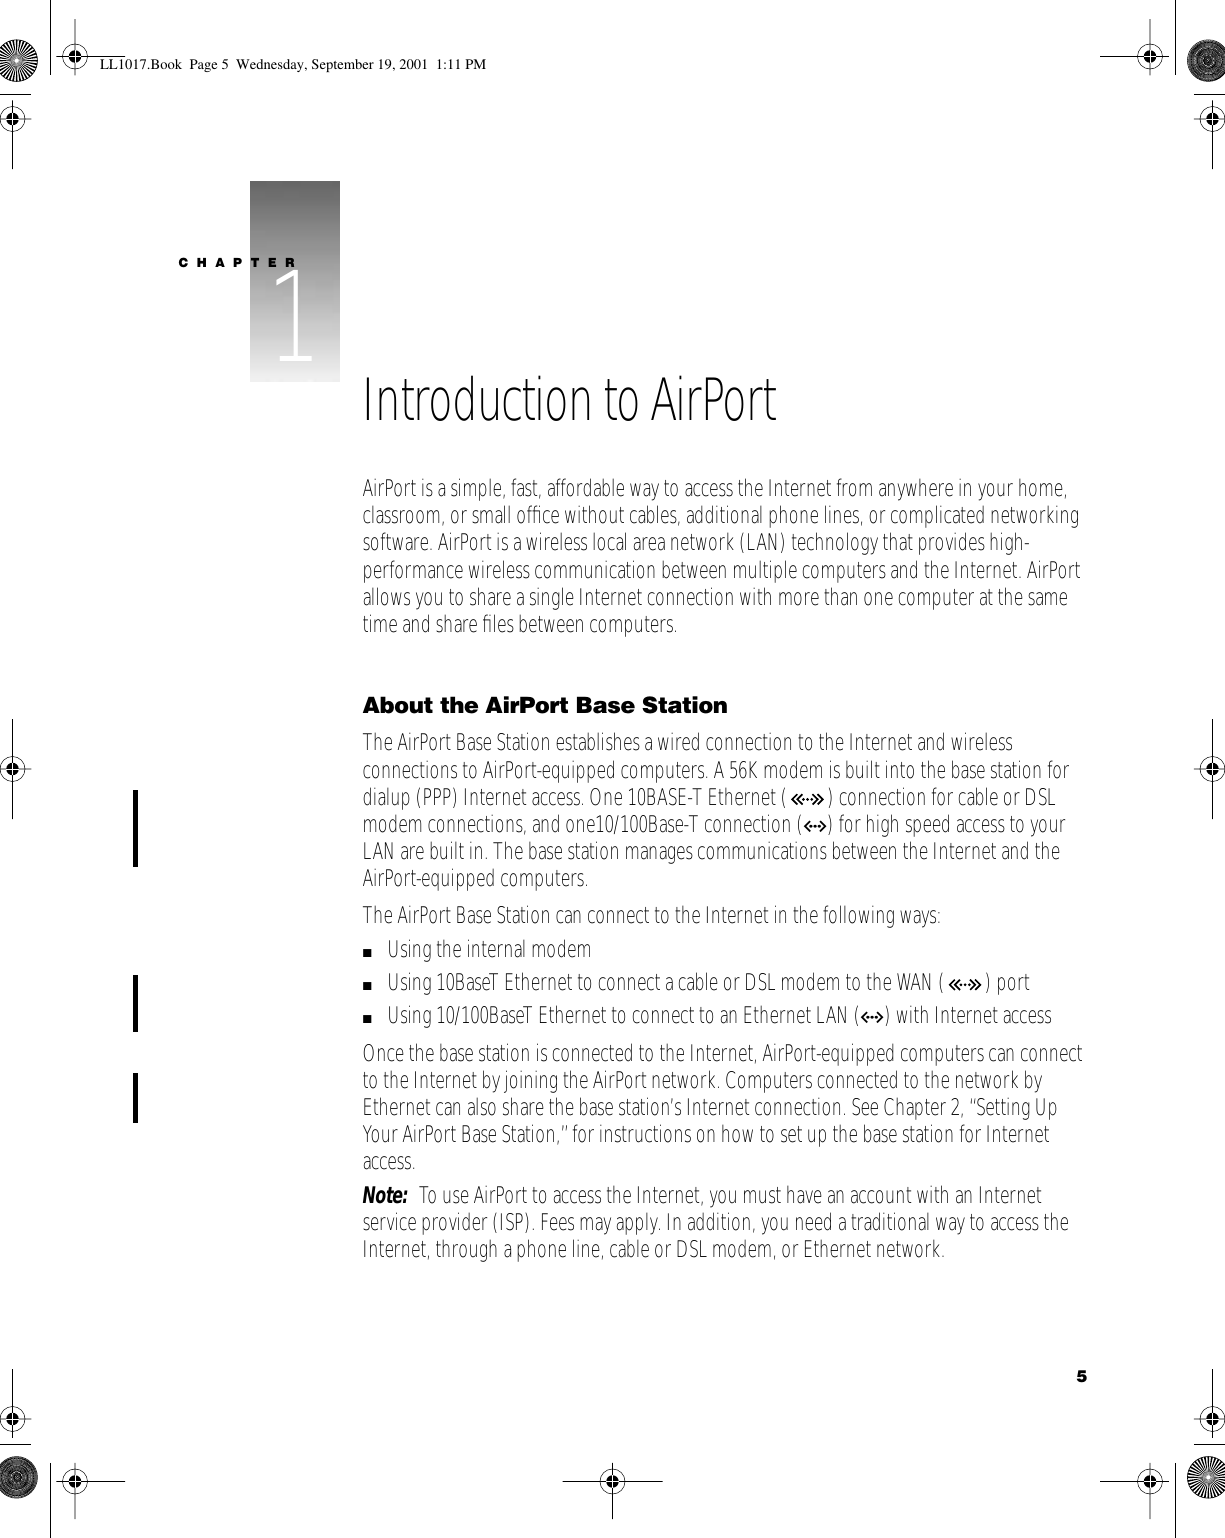    5 CHAPTER 1 1 Introduction to AirPort AirPort is a simple, fast, affordable way to access the Internet from anywhere in your home, classroom, or small ofﬁce without cables, additional phone lines, or complicated networking software. AirPort is a wireless local area network (LAN) technology that provides high-performance wireless communication between multiple computers and the Internet. AirPort allows you to share a single Internet connection with more than one computer at the same time and share ﬁles between computers. About the AirPort Base Station The AirPort Base Station establishes a wired connection to the Internet and wireless connections to AirPort-equipped computers. A 56K modem is built into the base station for dialup (PPP) Internet access. One 10BASE-T Ethernet ( ) connection for cable or DSL modem connections, and one10/100Base-T connection ( G ) for high speed access to your LAN are built in. The base station manages communications between the Internet and the AirPort-equipped computers.The AirPort Base Station can connect to the Internet in the following ways: m Using the internal modem  m Using 10BaseT Ethernet to connect a cable or DSL modem to the WAN ( ) port m Using 10/100BaseT Ethernet to connect to an Ethernet LAN ( G ) with Internet accessOnce the base station is connected to the Internet, AirPort-equipped computers can connect to the Internet by joining the AirPort network. Computers connected to the network by Ethernet can also share the base station’s Internet connection. See Chapter 2, “Setting Up Your AirPort Base Station,” for instructions on how to set up the base station for Internet access. Note:   To use AirPort to access the Internet, you must have an account with an Internet service provider (ISP). Fees may apply. In addition, you need a traditional way to access the Internet, through a phone line, cable or DSL modem, or Ethernet network. LL1017.Book  Page 5  Wednesday, September 19, 2001  1:11 PM